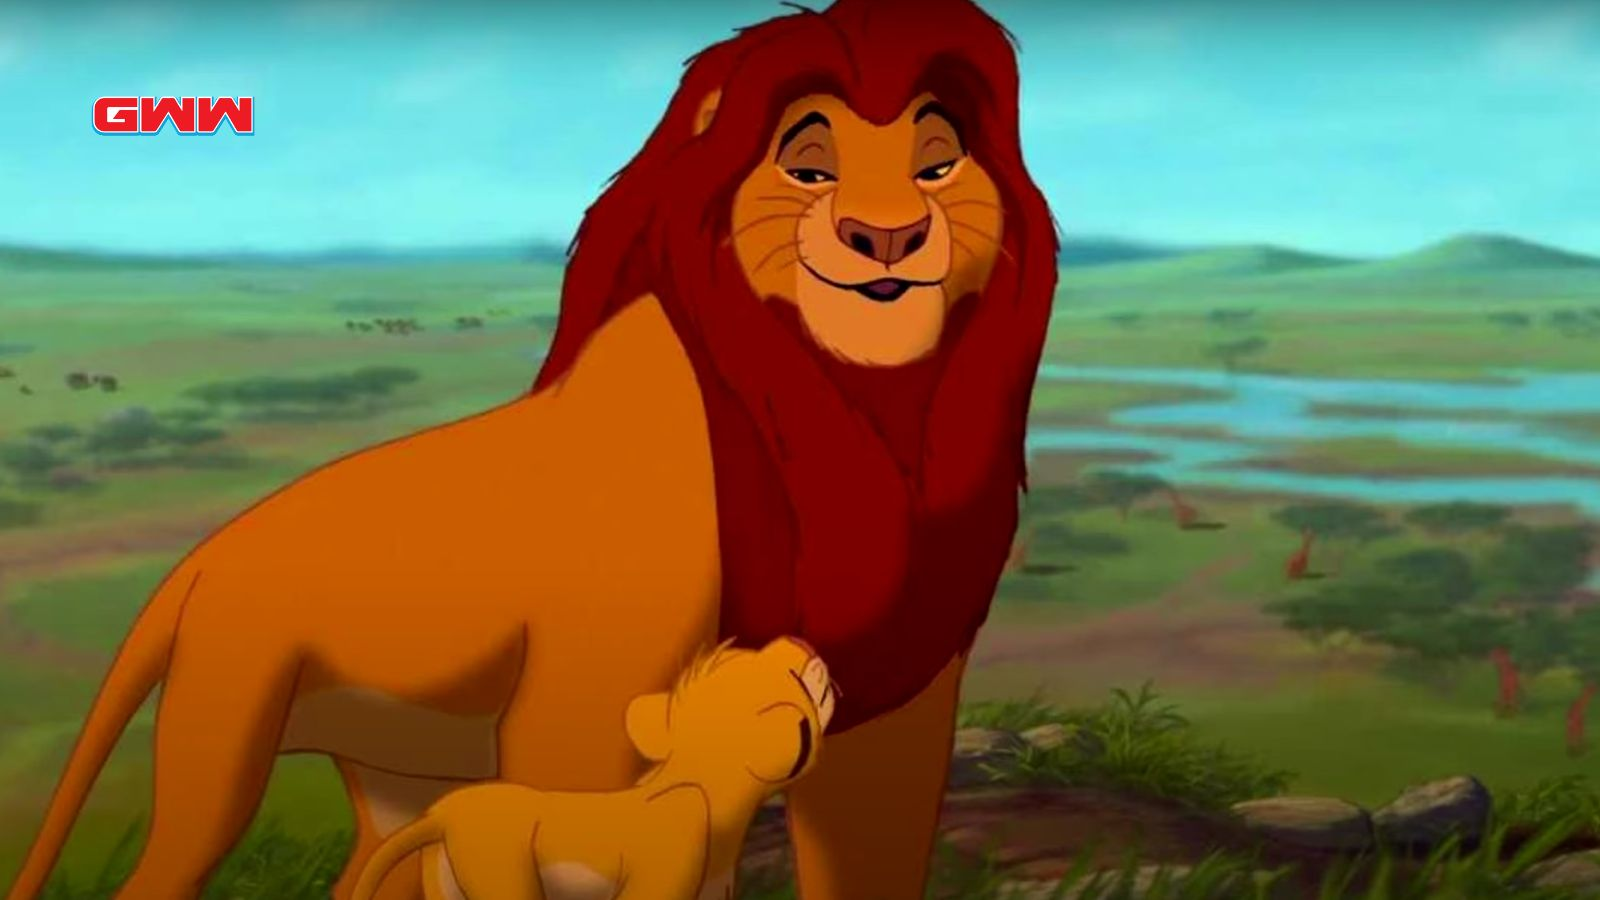 Mufasa talking to a young Simba, Mufasa meaning